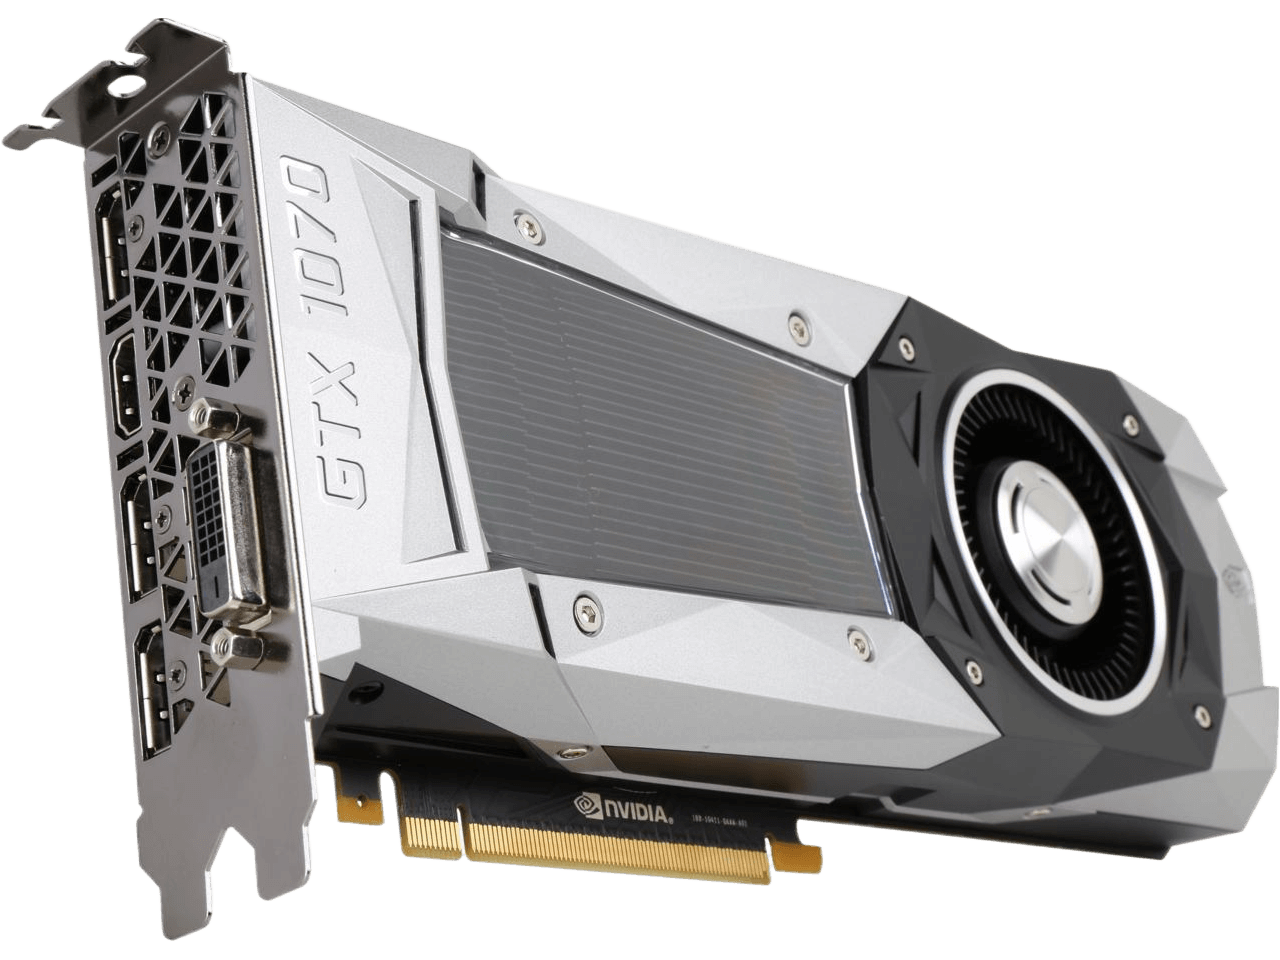 ASUS GeForce GTX 1070 Founders Edition 8GB Graphics Card GTX1070-8G-GAMING